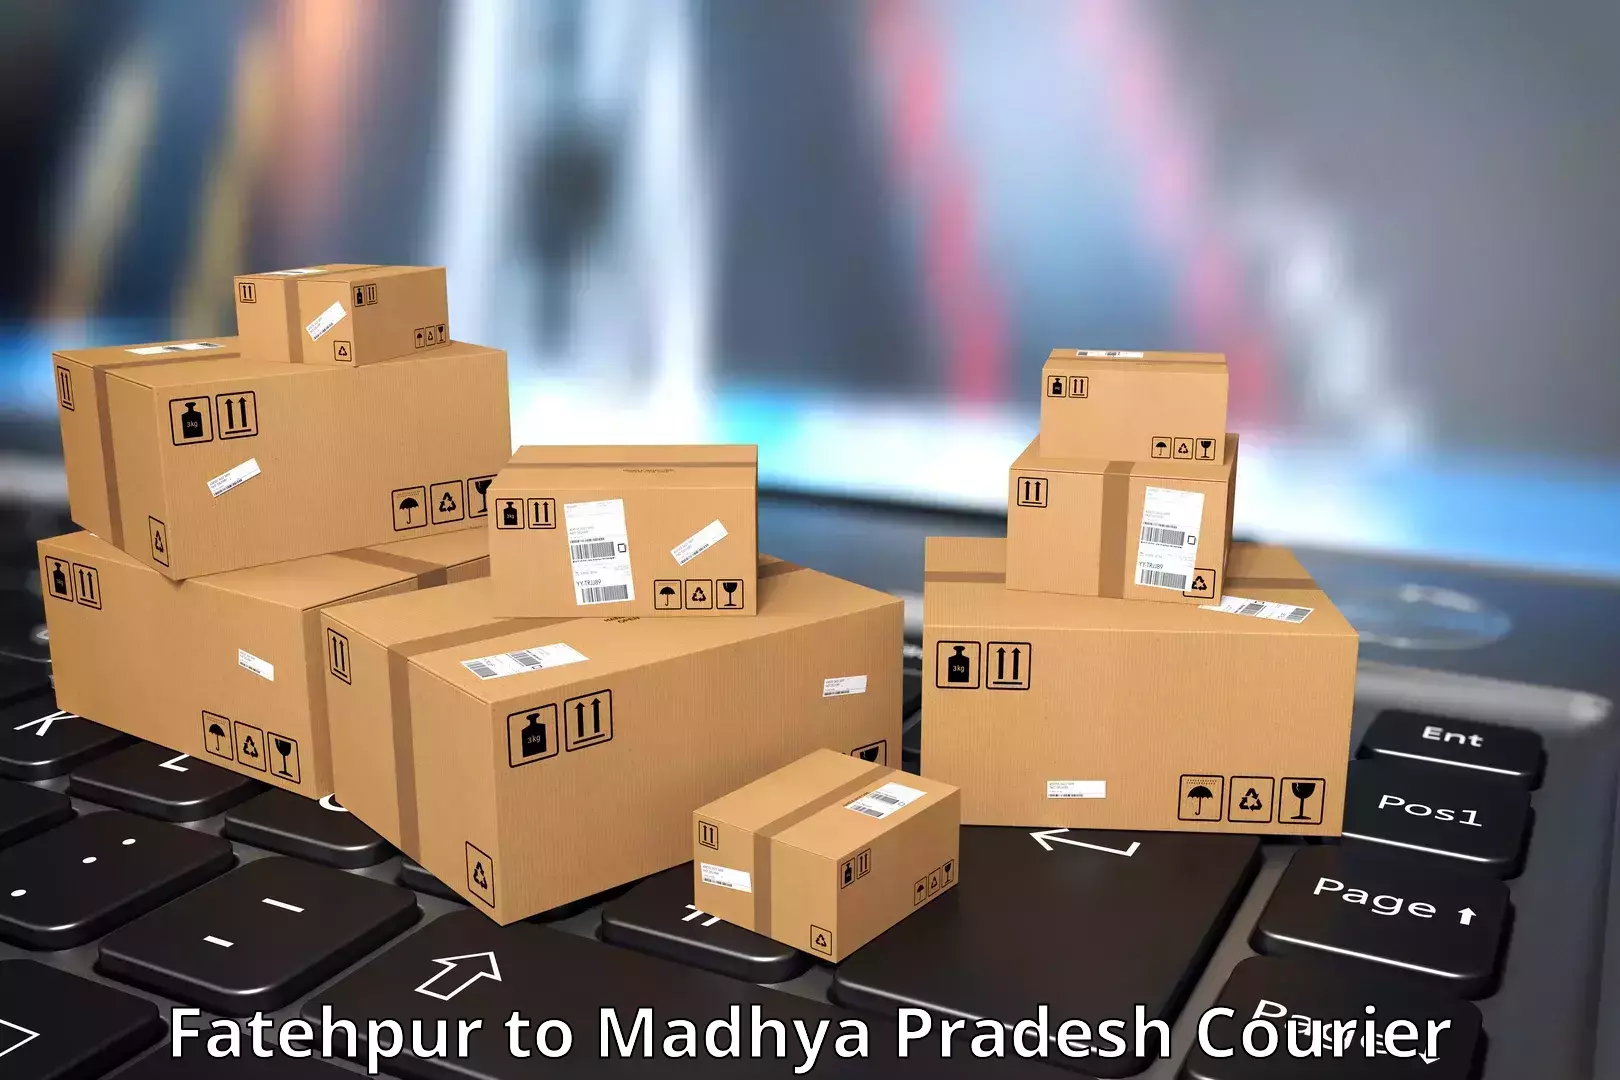 Multi-national courier services Fatehpur to Sidhi